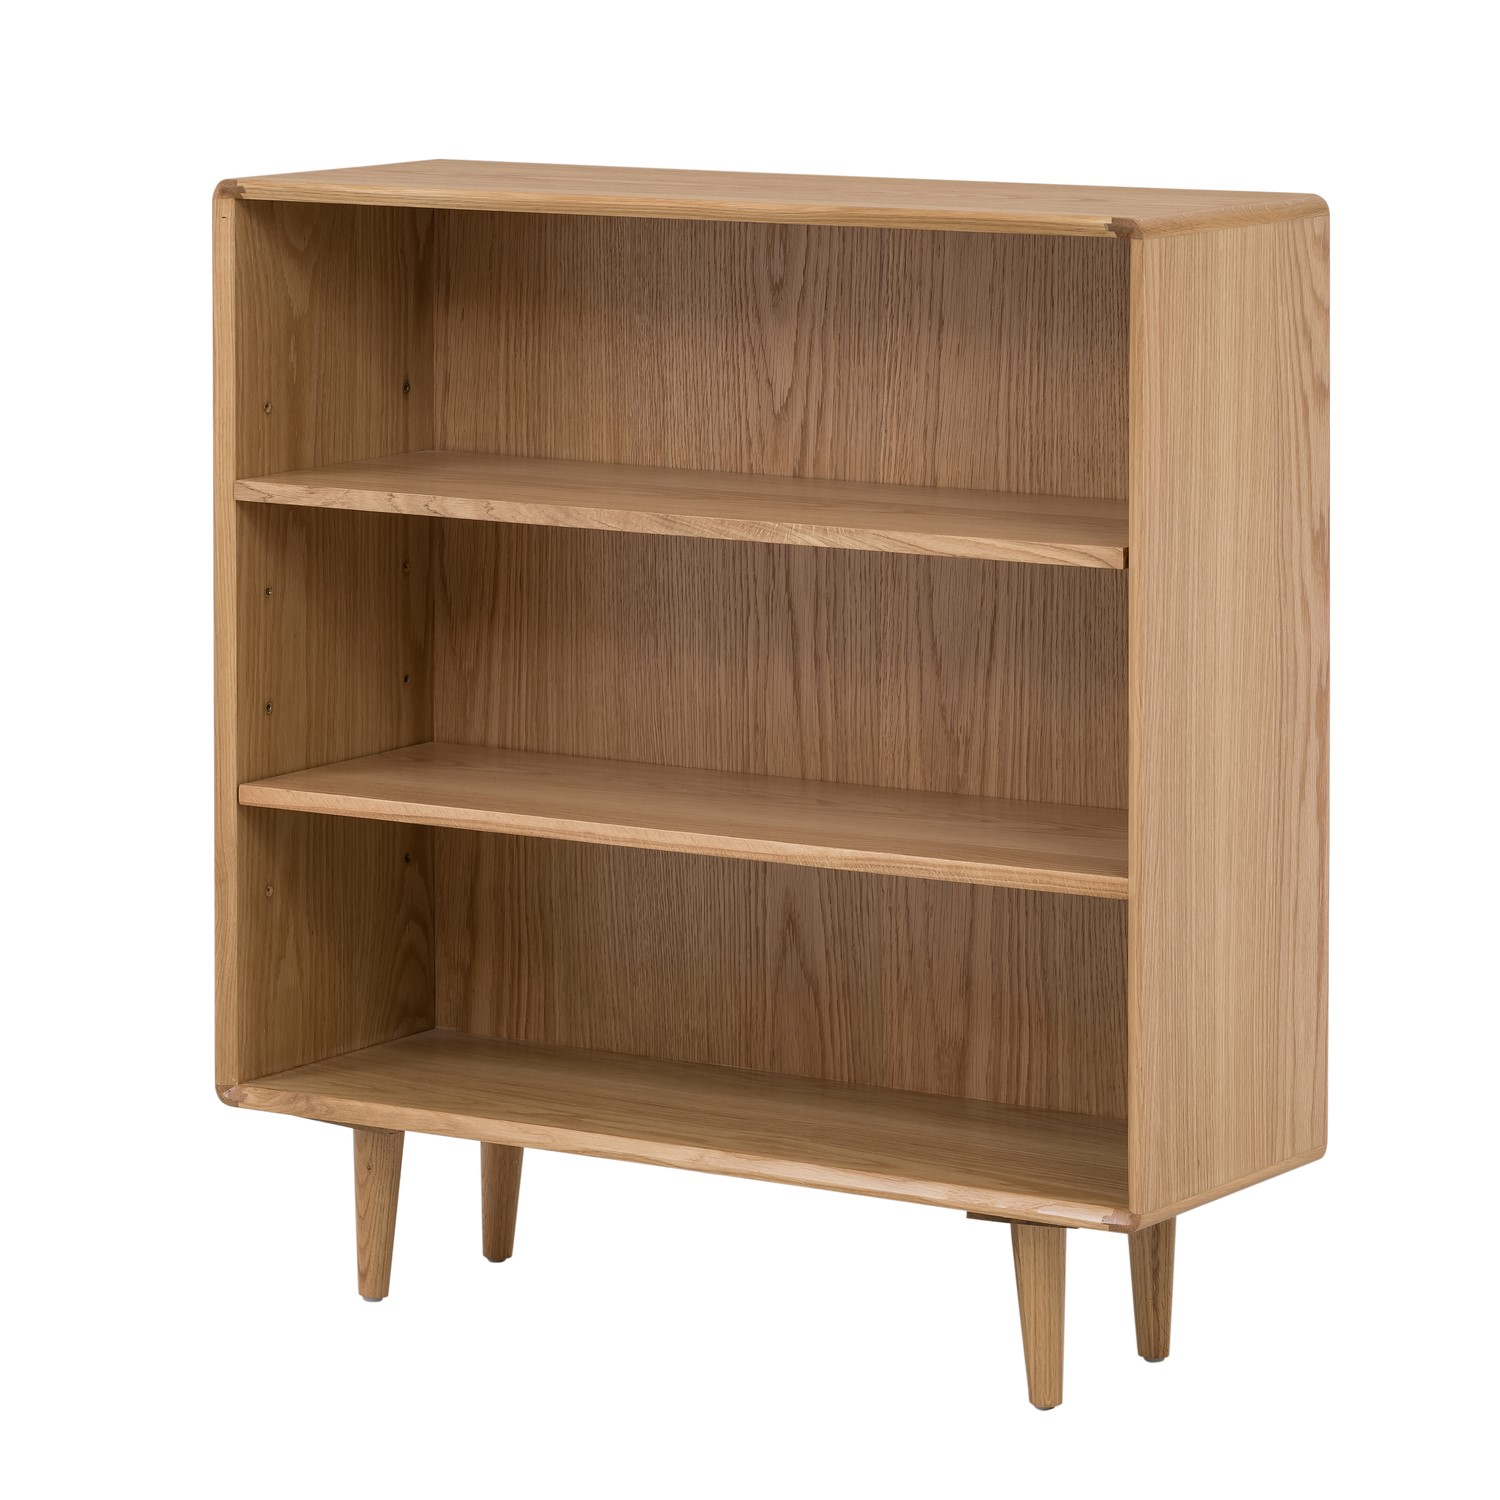 Read more about Low solid oak bookcase manny